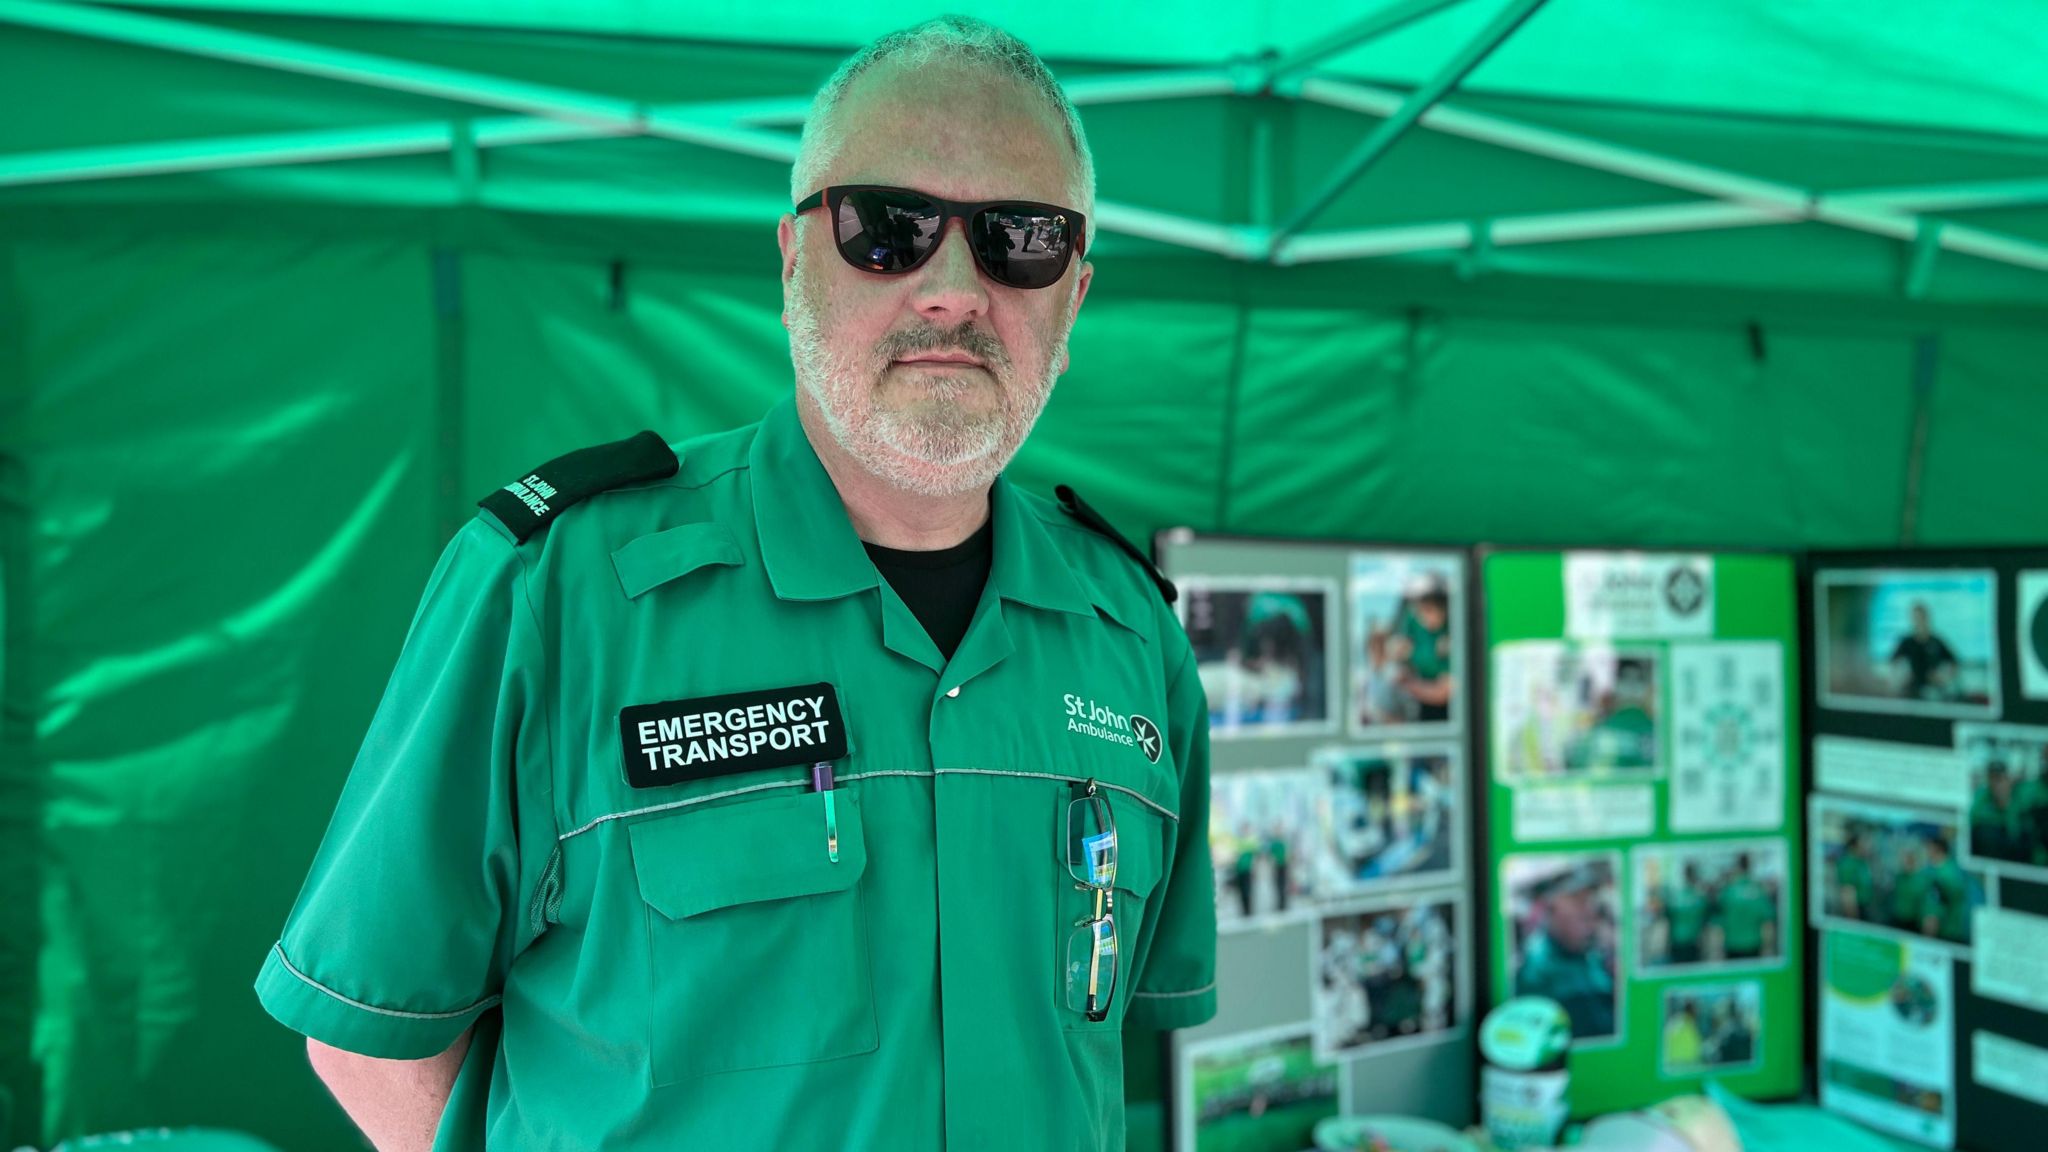 Mark looks at the camera while in his uniform and wearing sun glasses. He is in the charity's first aid tent with pictures behind him showing what the charity does